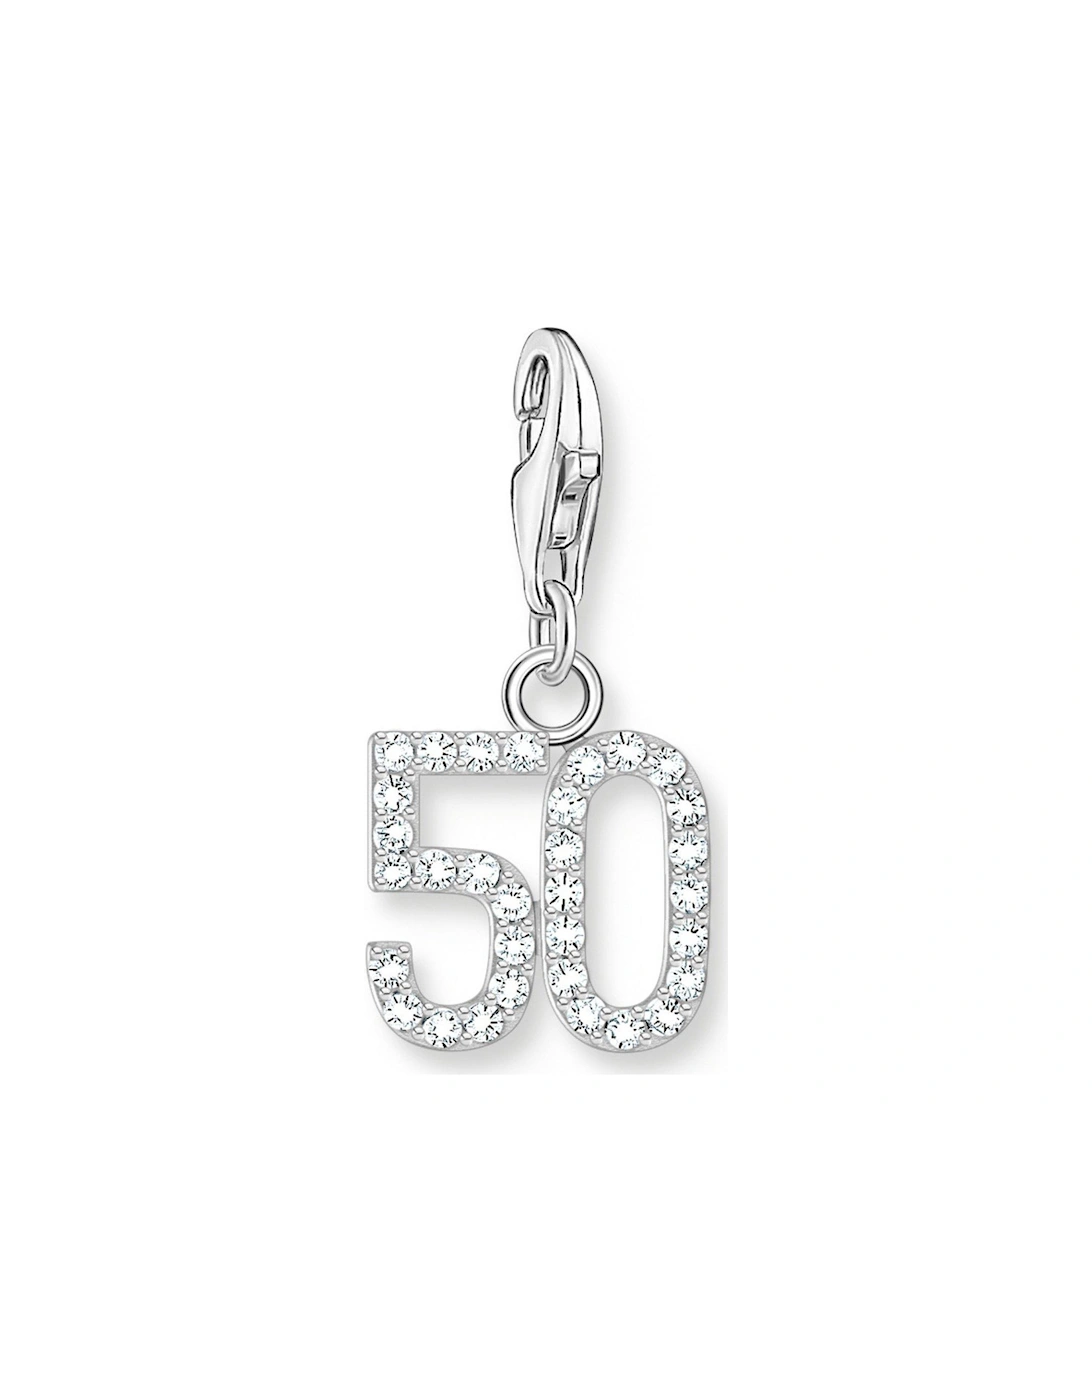 Charm Number 50 - 925 Silver and Zirconia, 2 of 1